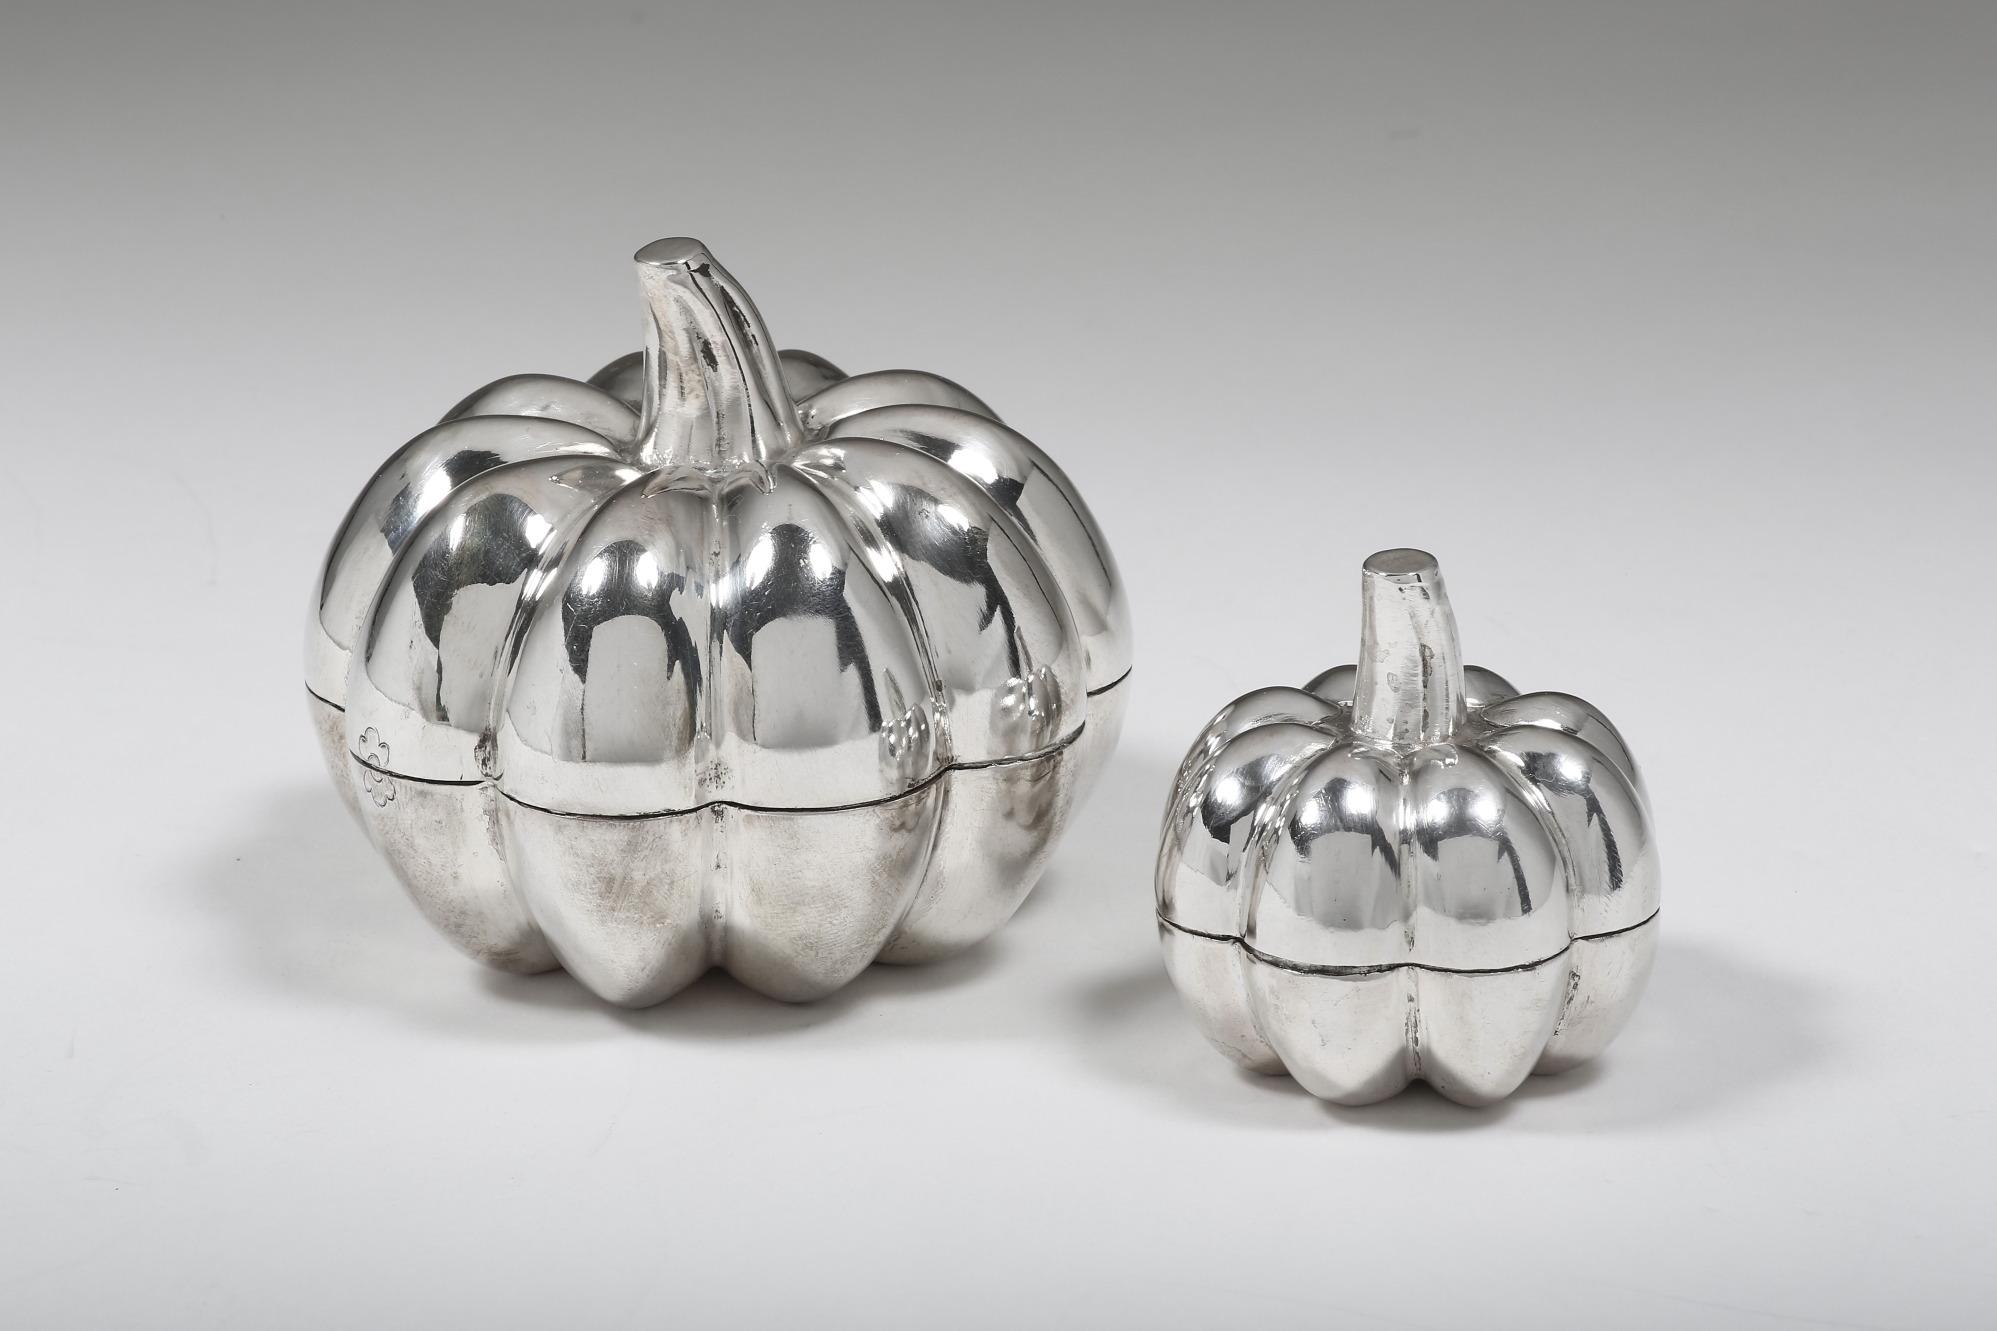 The contemporary solid silver pumpkin set of two is handcrafted by experienced silversmiths with fine techniques. They make perfect decorations for dinner tables and all kinds of events suitable. The pumpkins are designed to be opened for storage